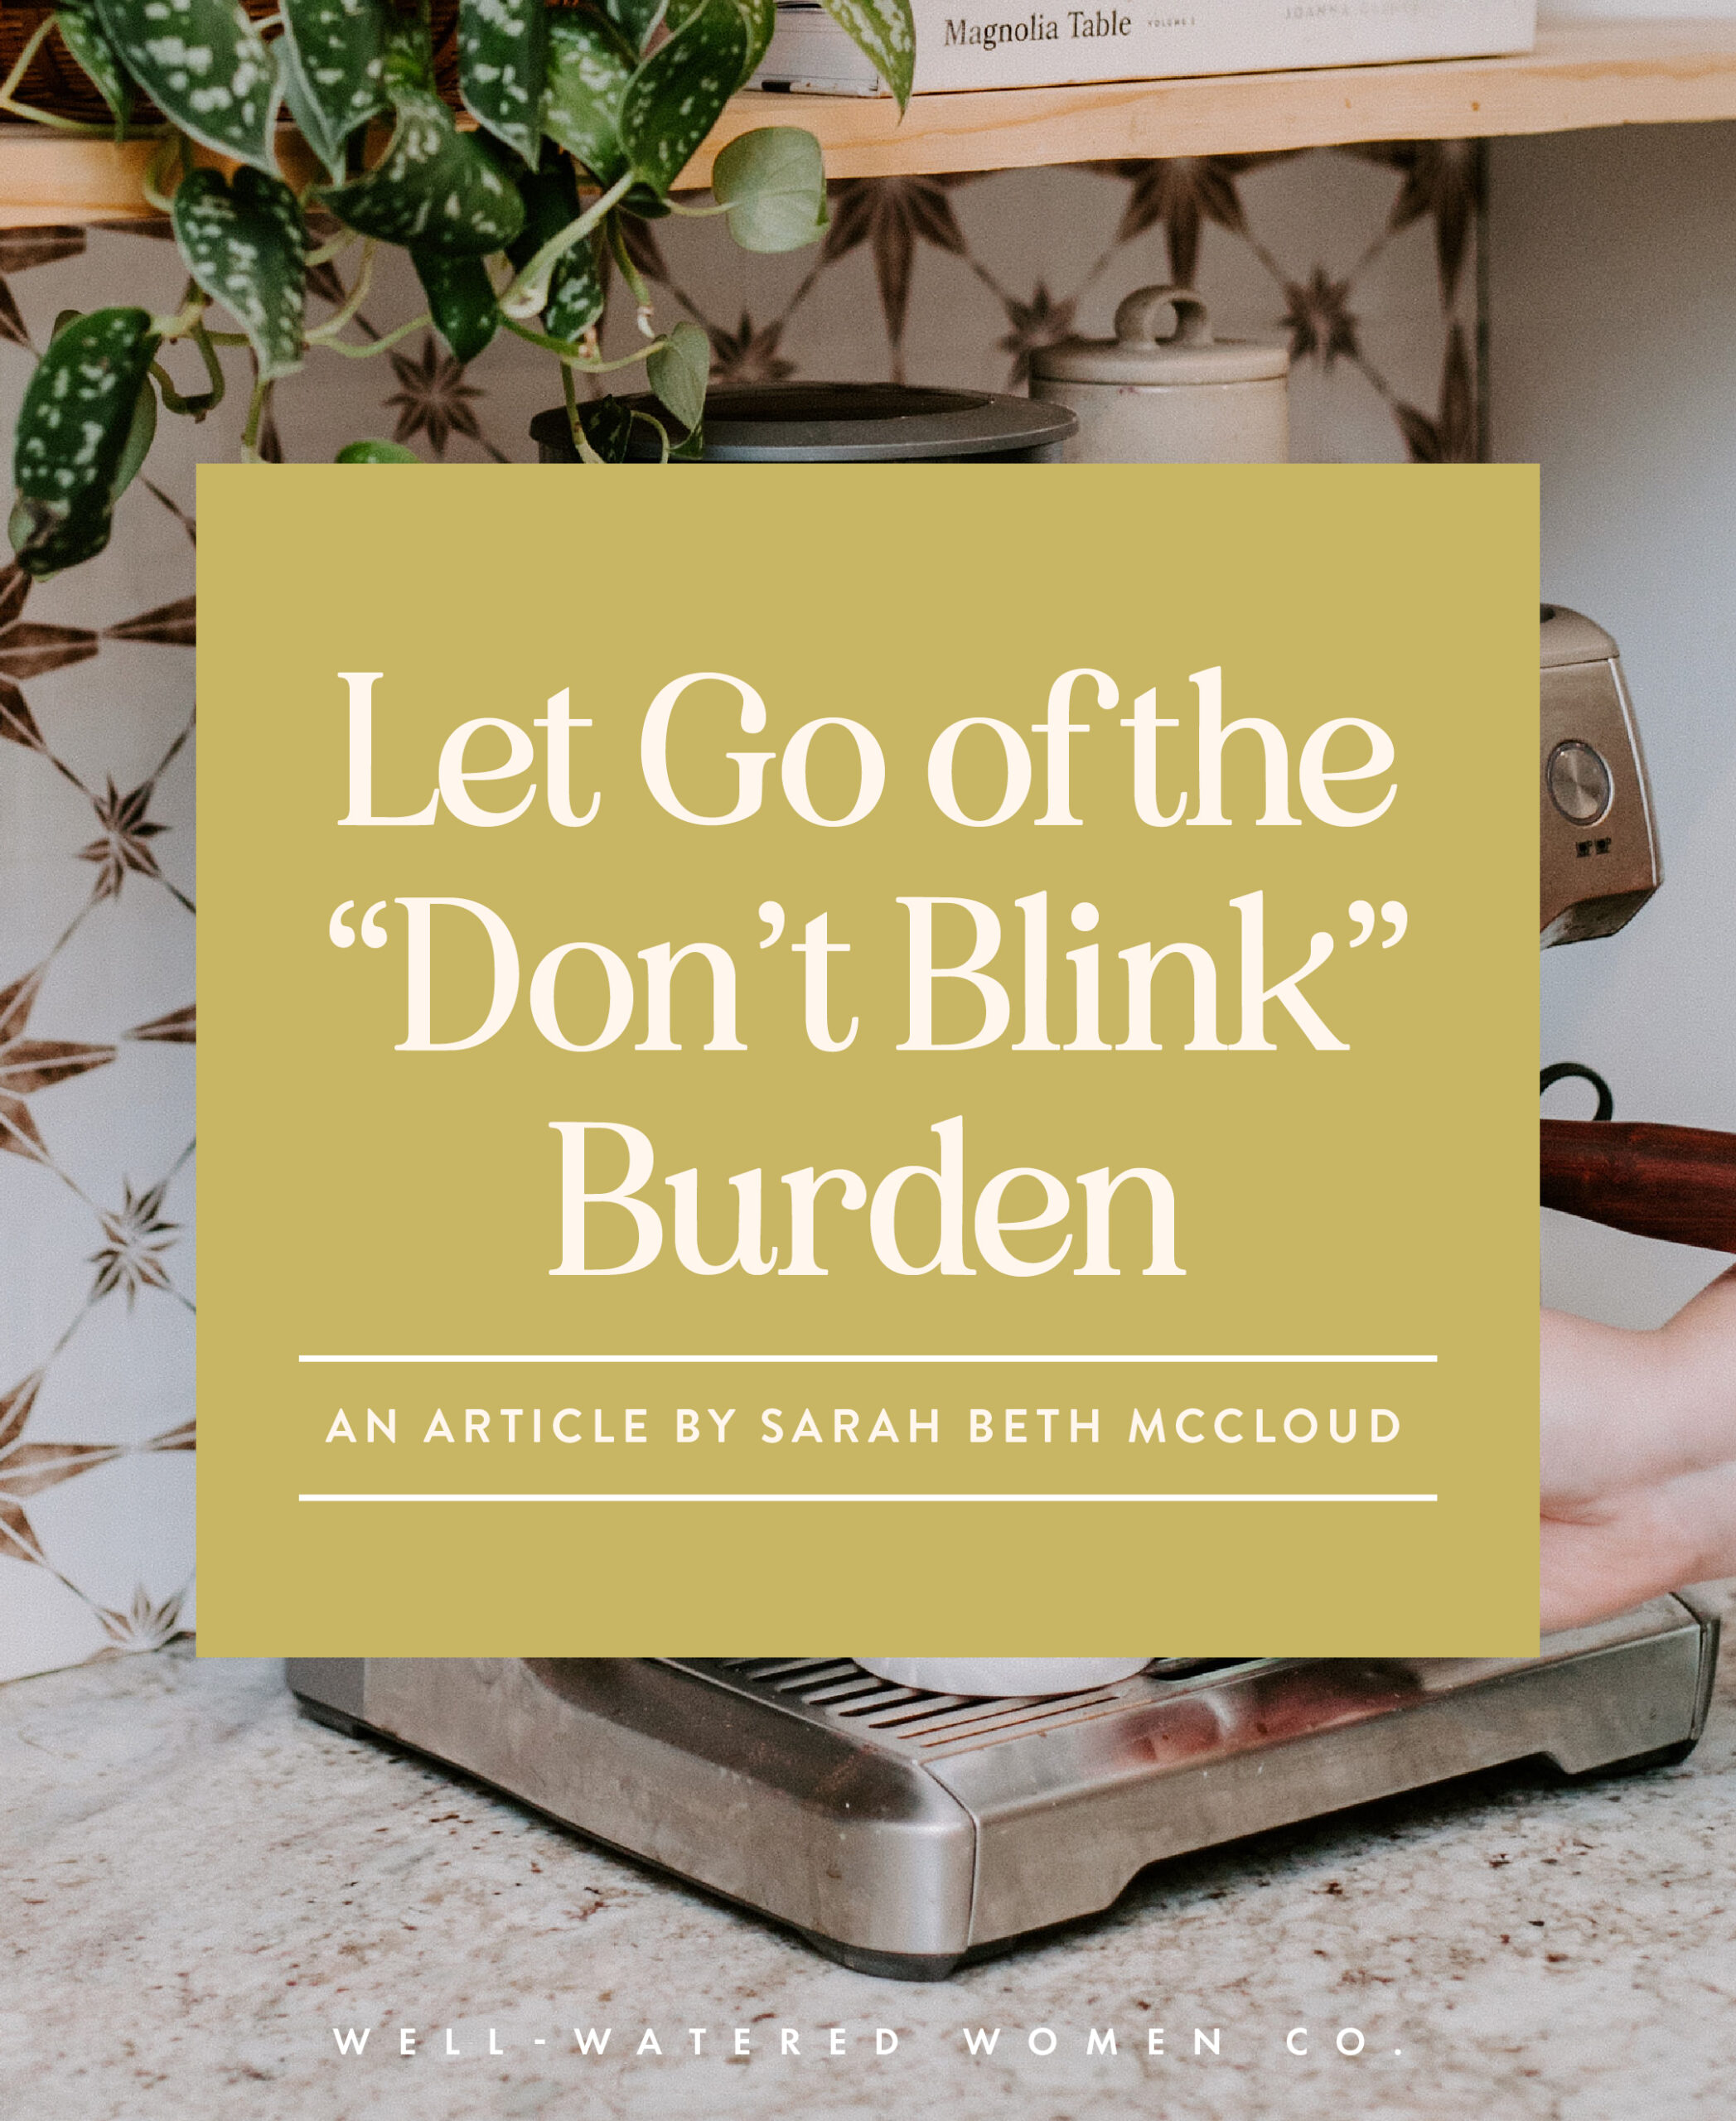 Let Go of the Don't Blink Burden - an article from Well-Watered Women